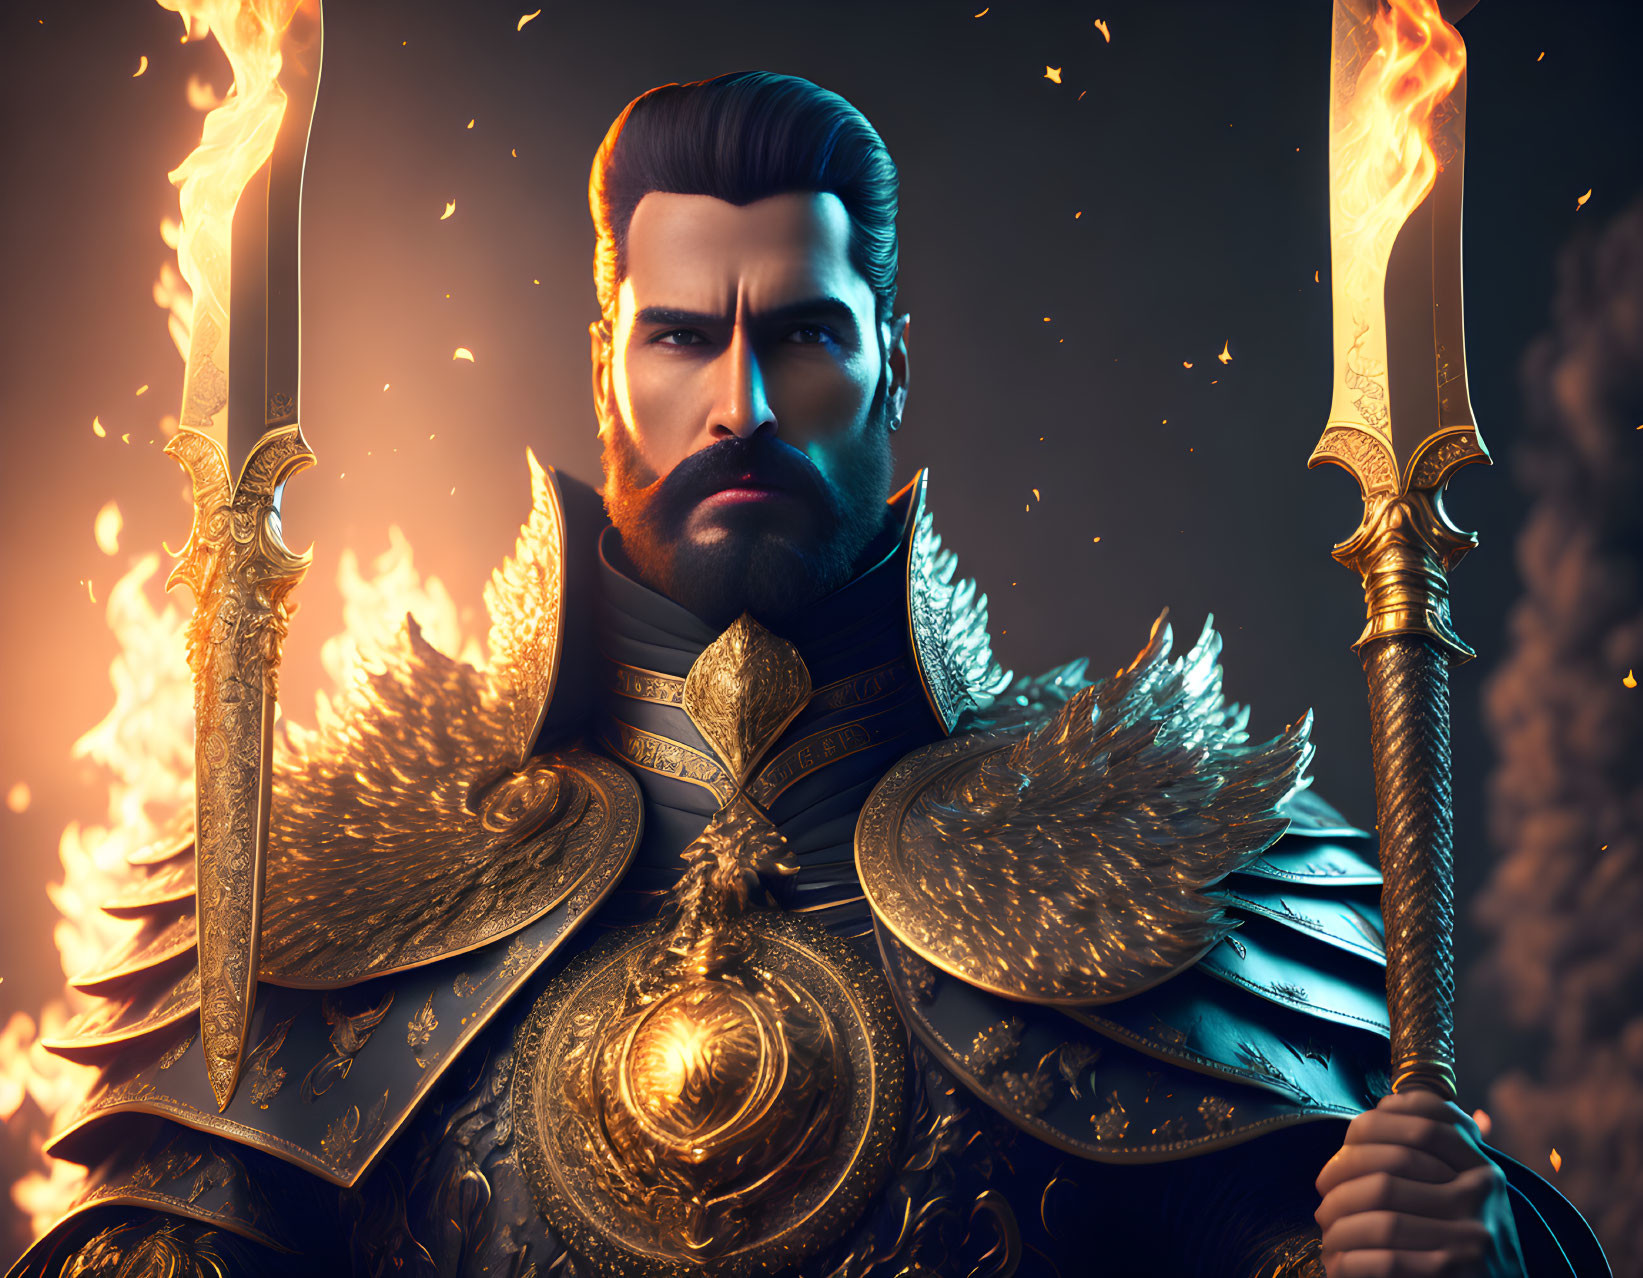 Regal bearded warrior in golden armor with flaming torches